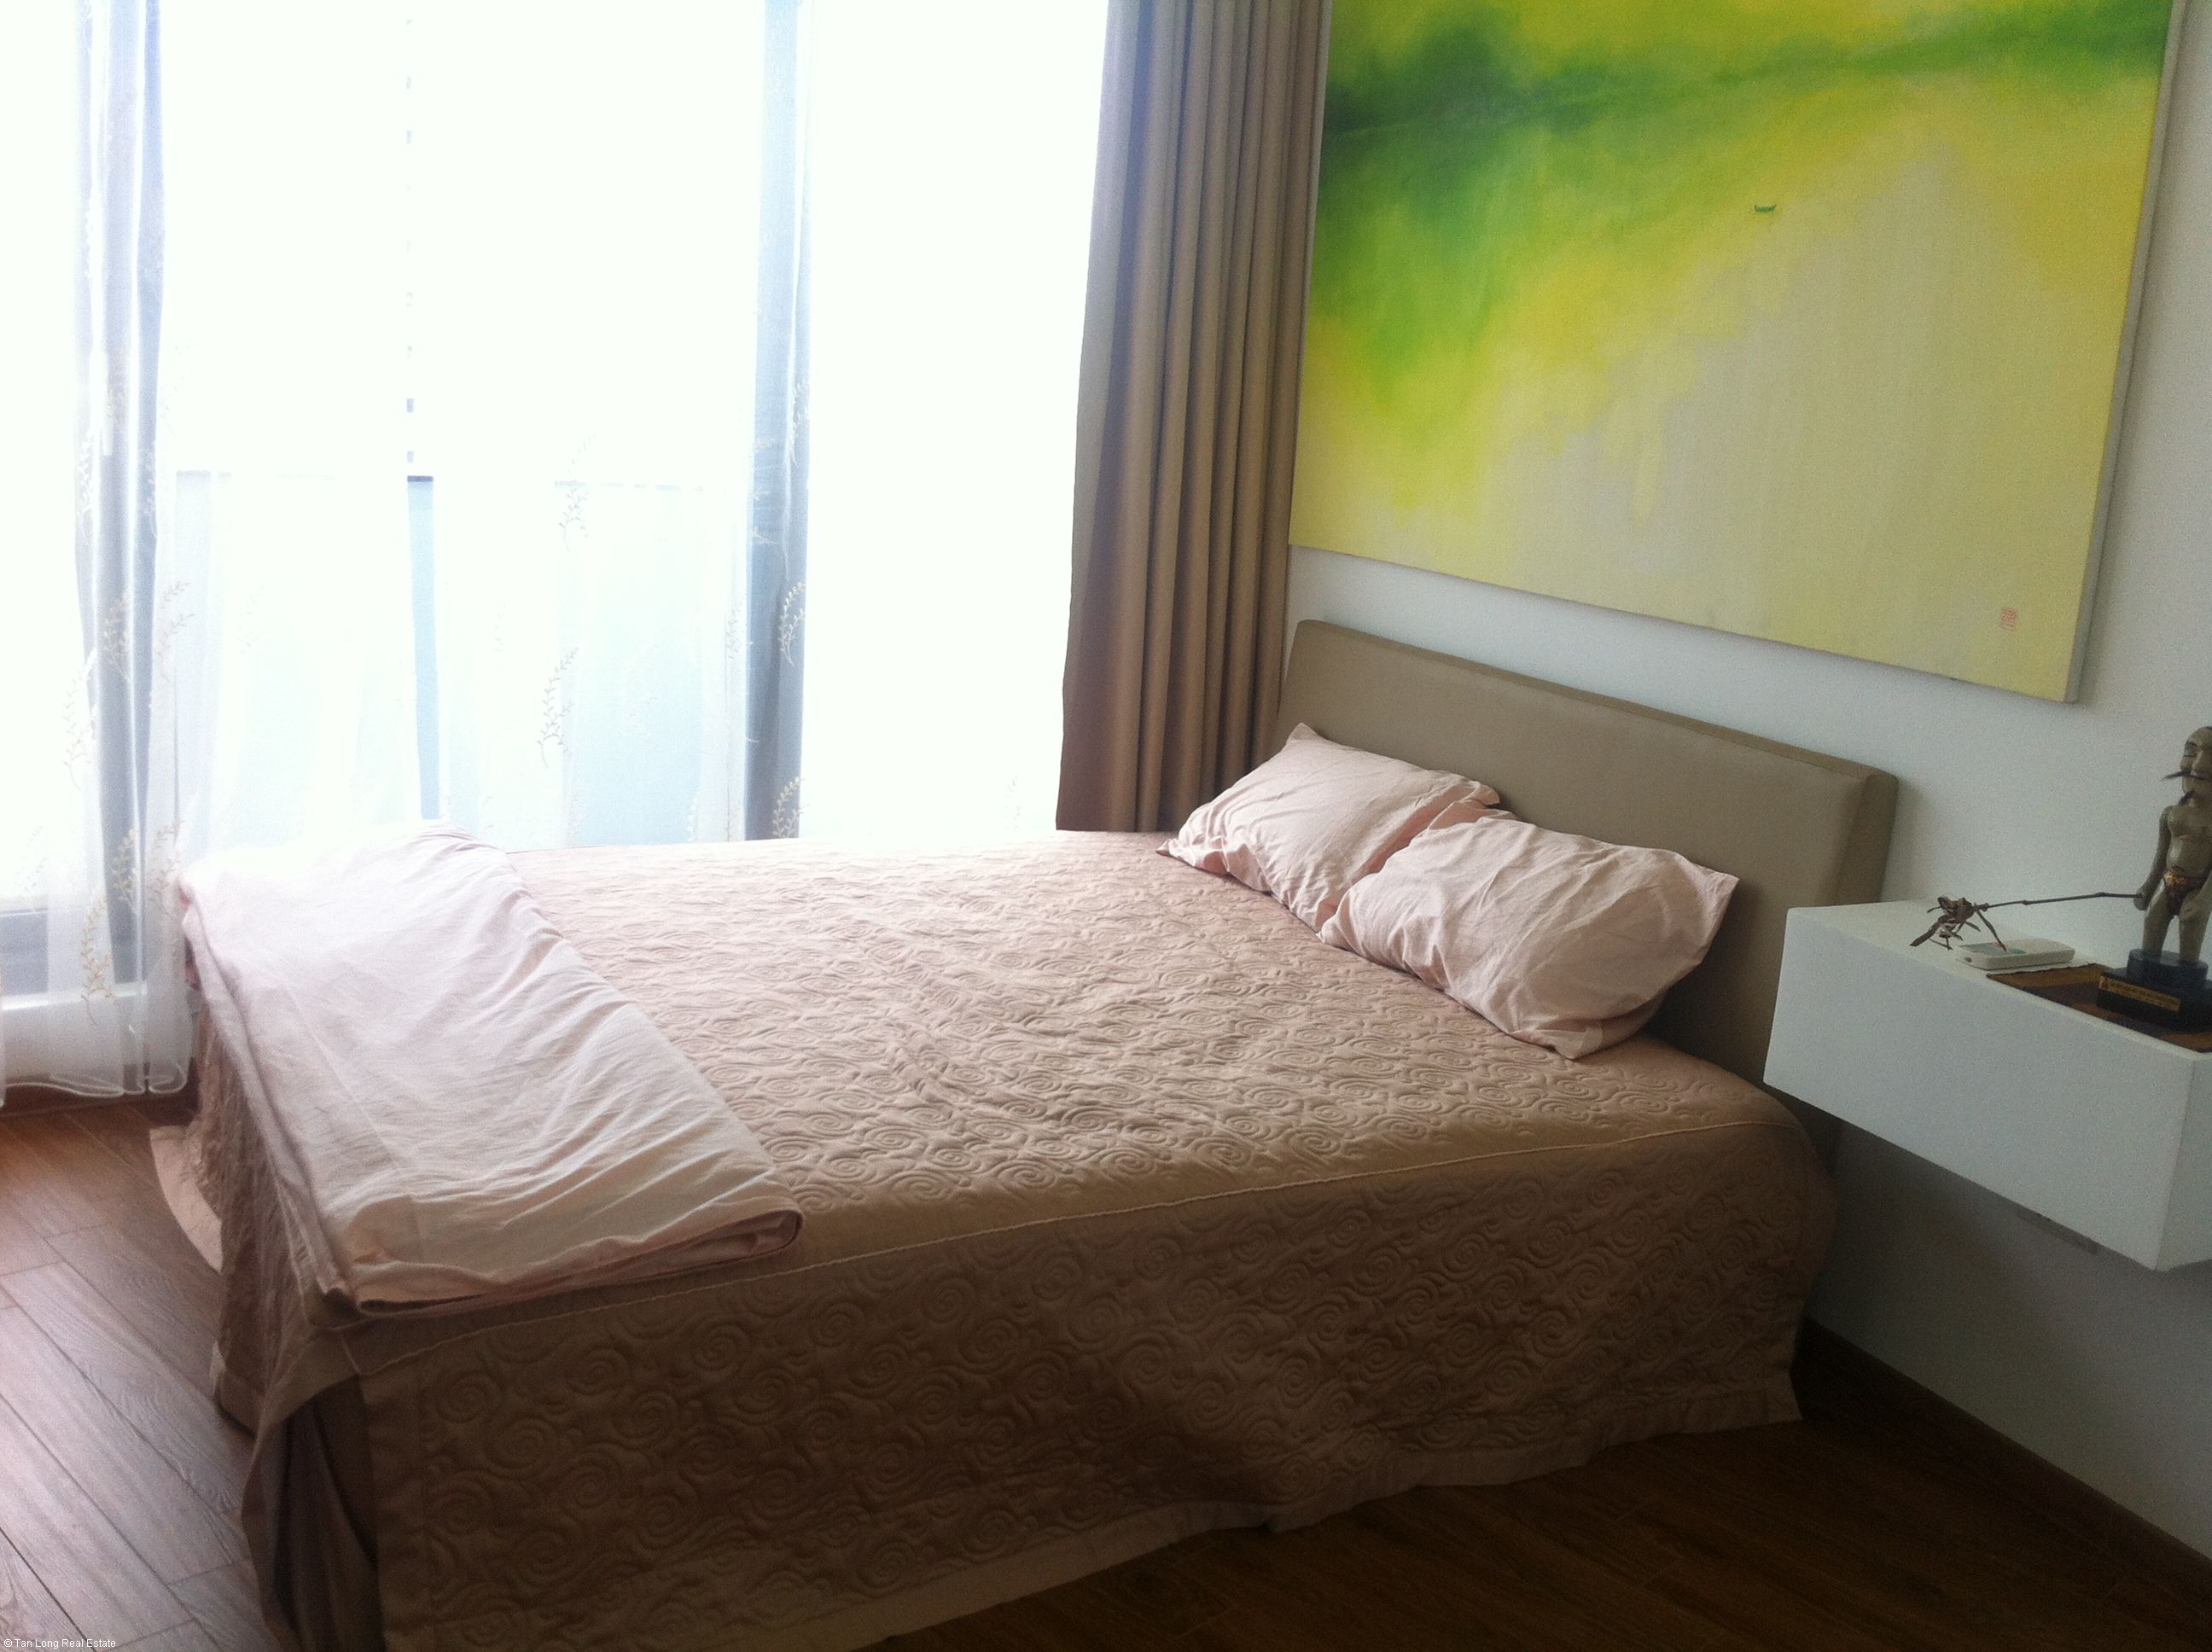 2 bedroom apartment for rent in Eurowindow Multi Complex, Tran Duy Hung str, Cau Giay dist 5